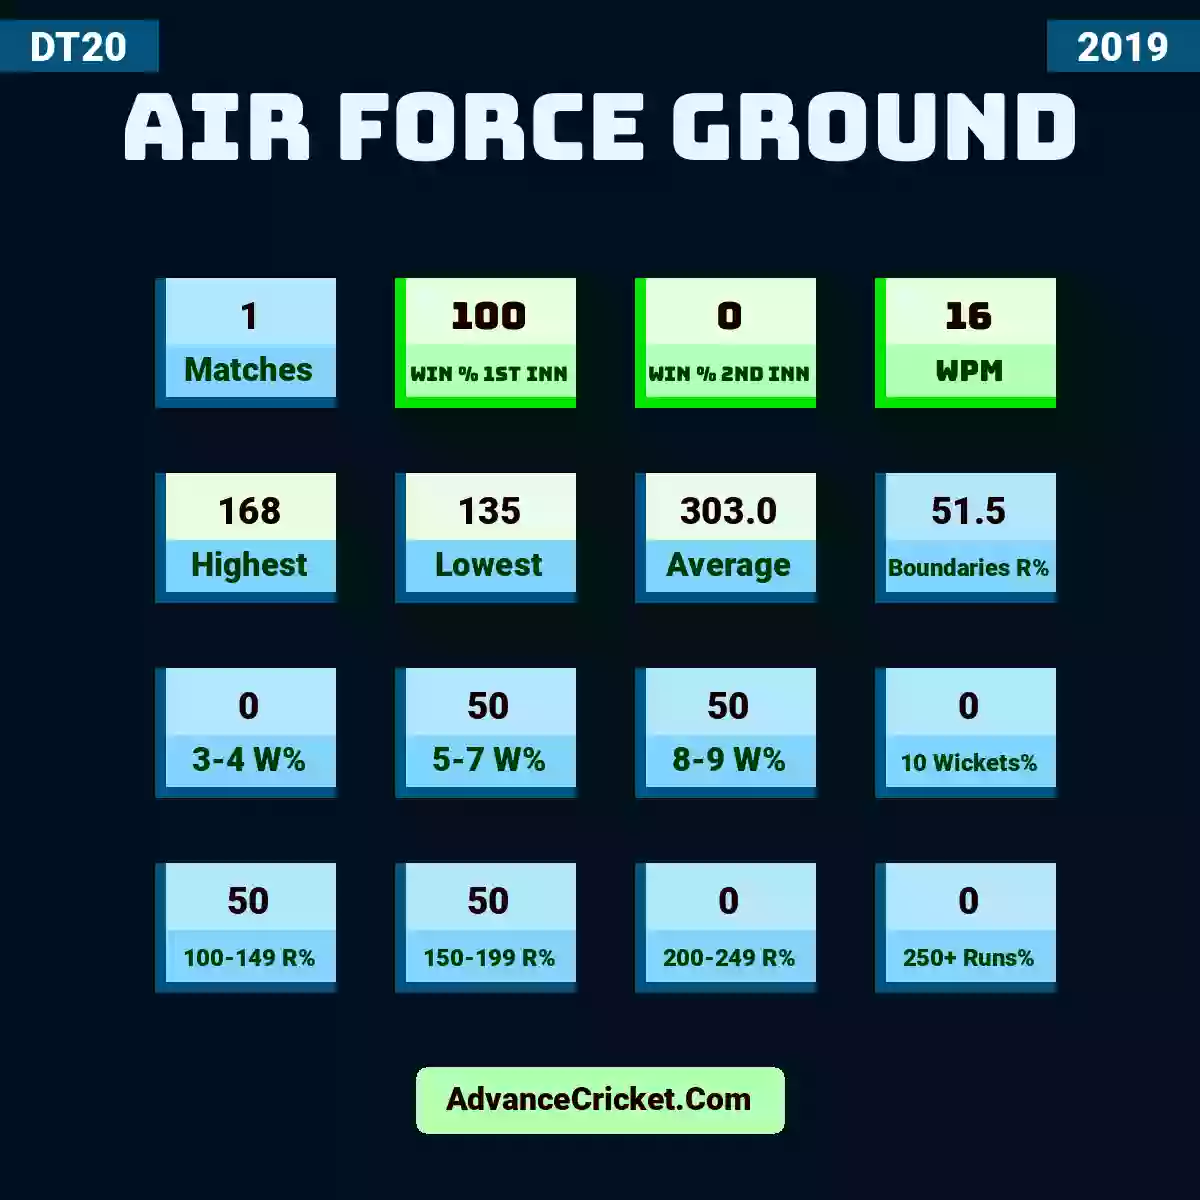 Image showing Air Force Ground with Matches: 1, Win % 1st Inn: 100, Win % 2nd Inn: 0, WPM: 16, Highest: 168, Lowest: 135, Average: 303.0, Boundaries R%: 51.5, 3-4 W%: 0, 5-7 W%: 50, 8-9 W%: 50, 10 Wickets%: 0, 100-149 R%: 50, 150-199 R%: 50, 200-249 R%: 0, 250+ Runs%: 0.